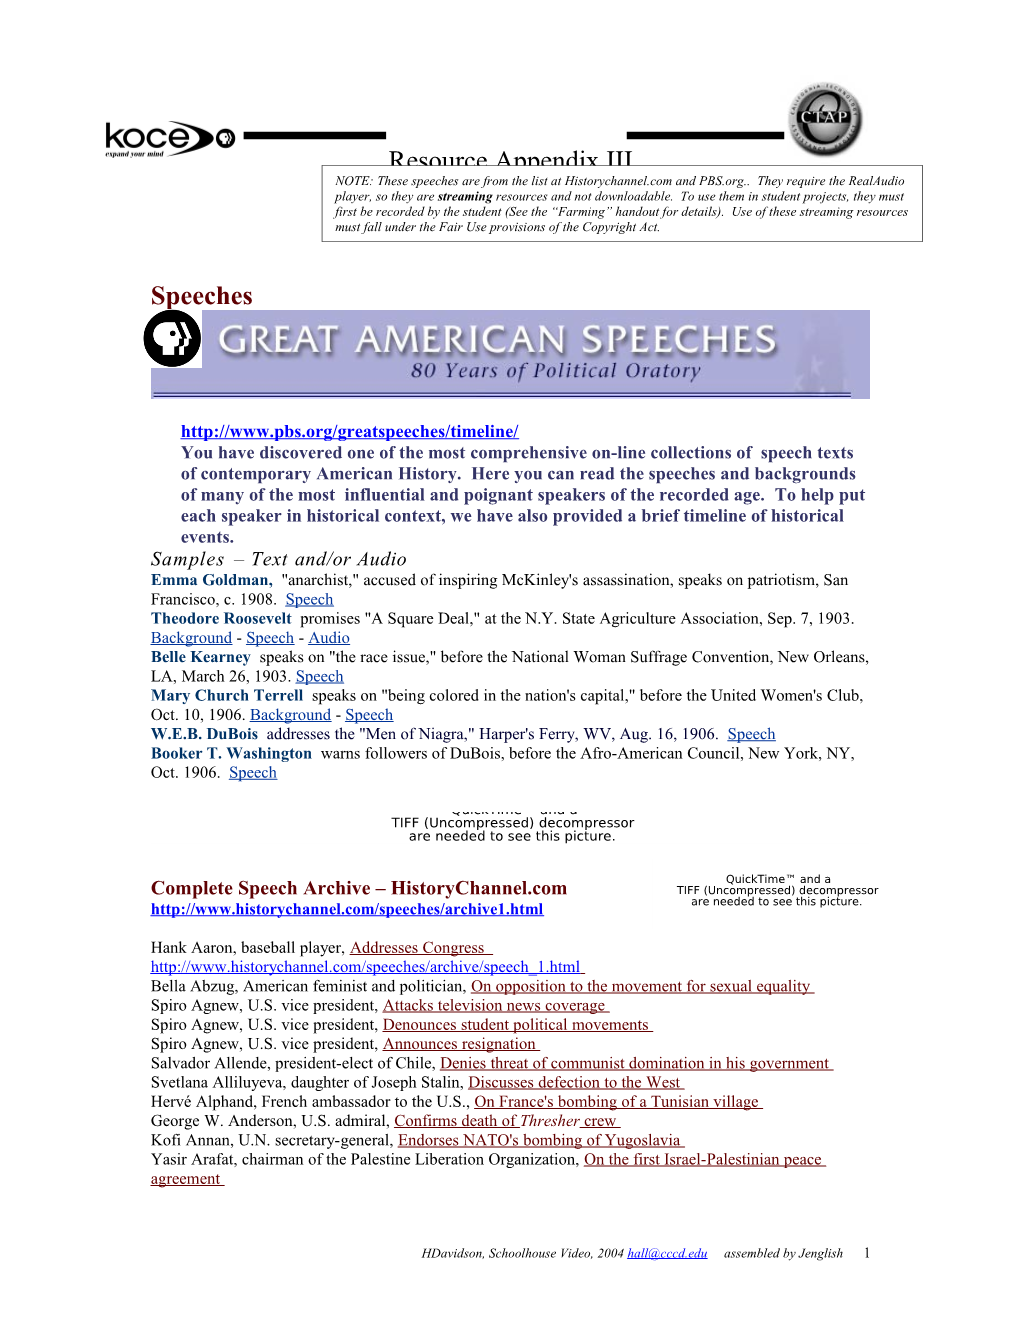 You Have Discovered One of the Most Comprehensive On-Line Collections of Speech Texts